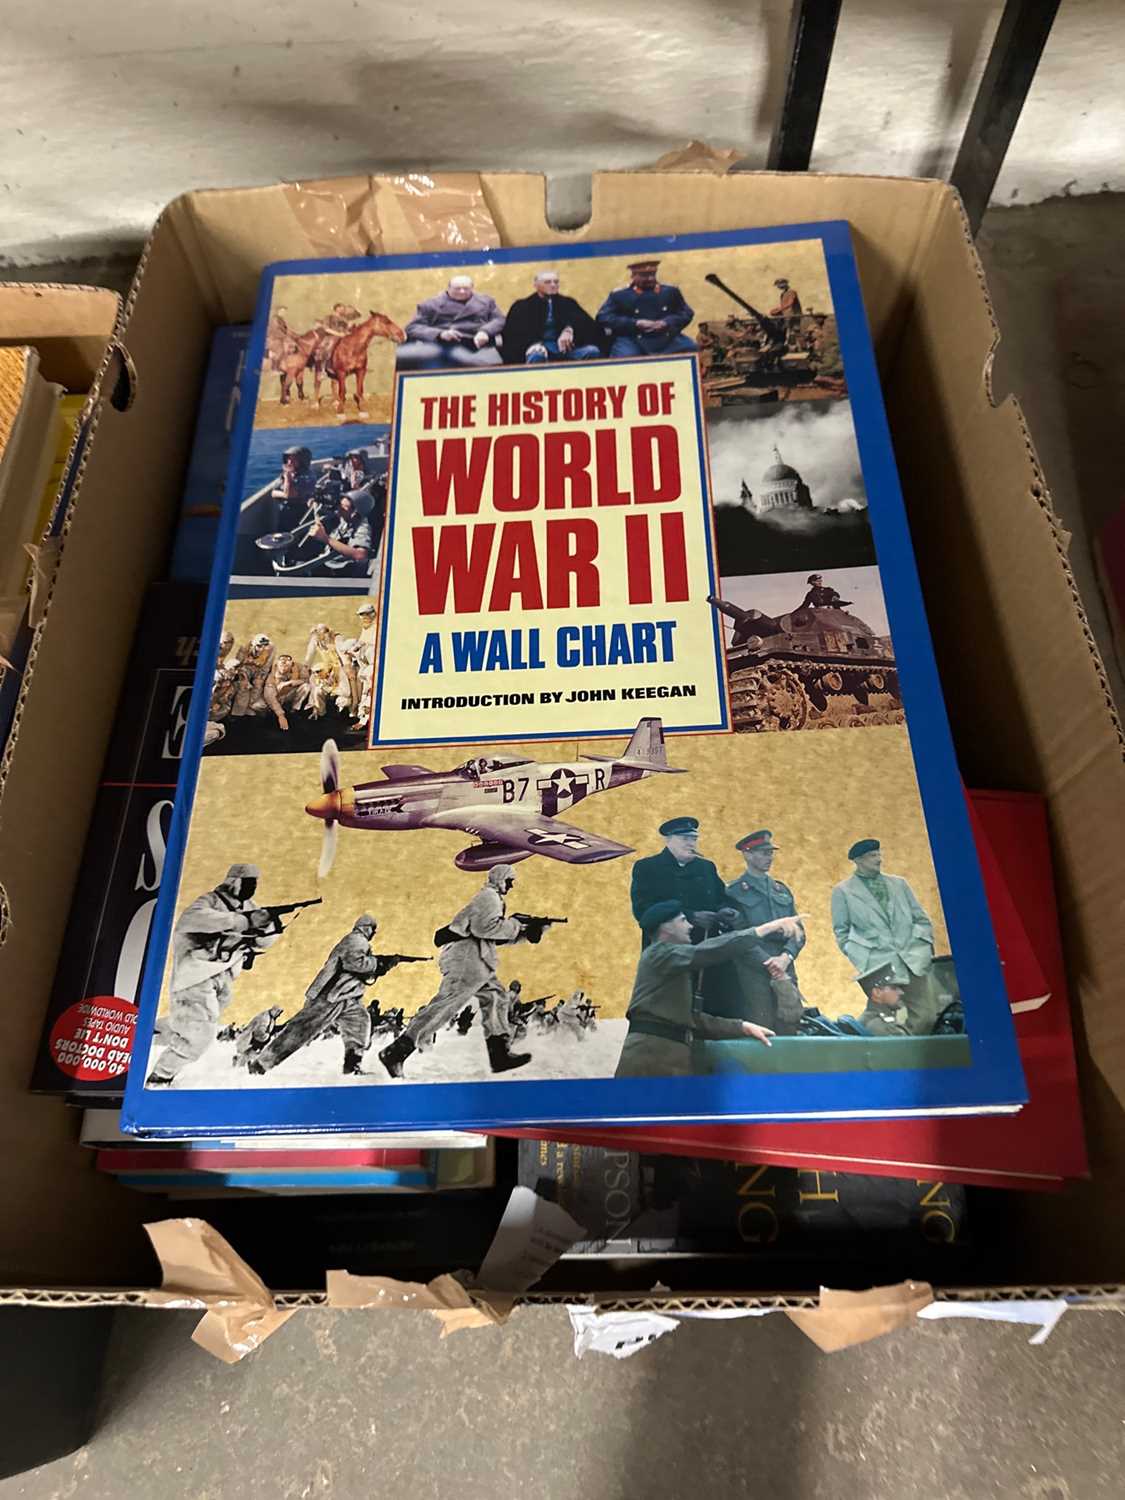 Books to include Second World War and others